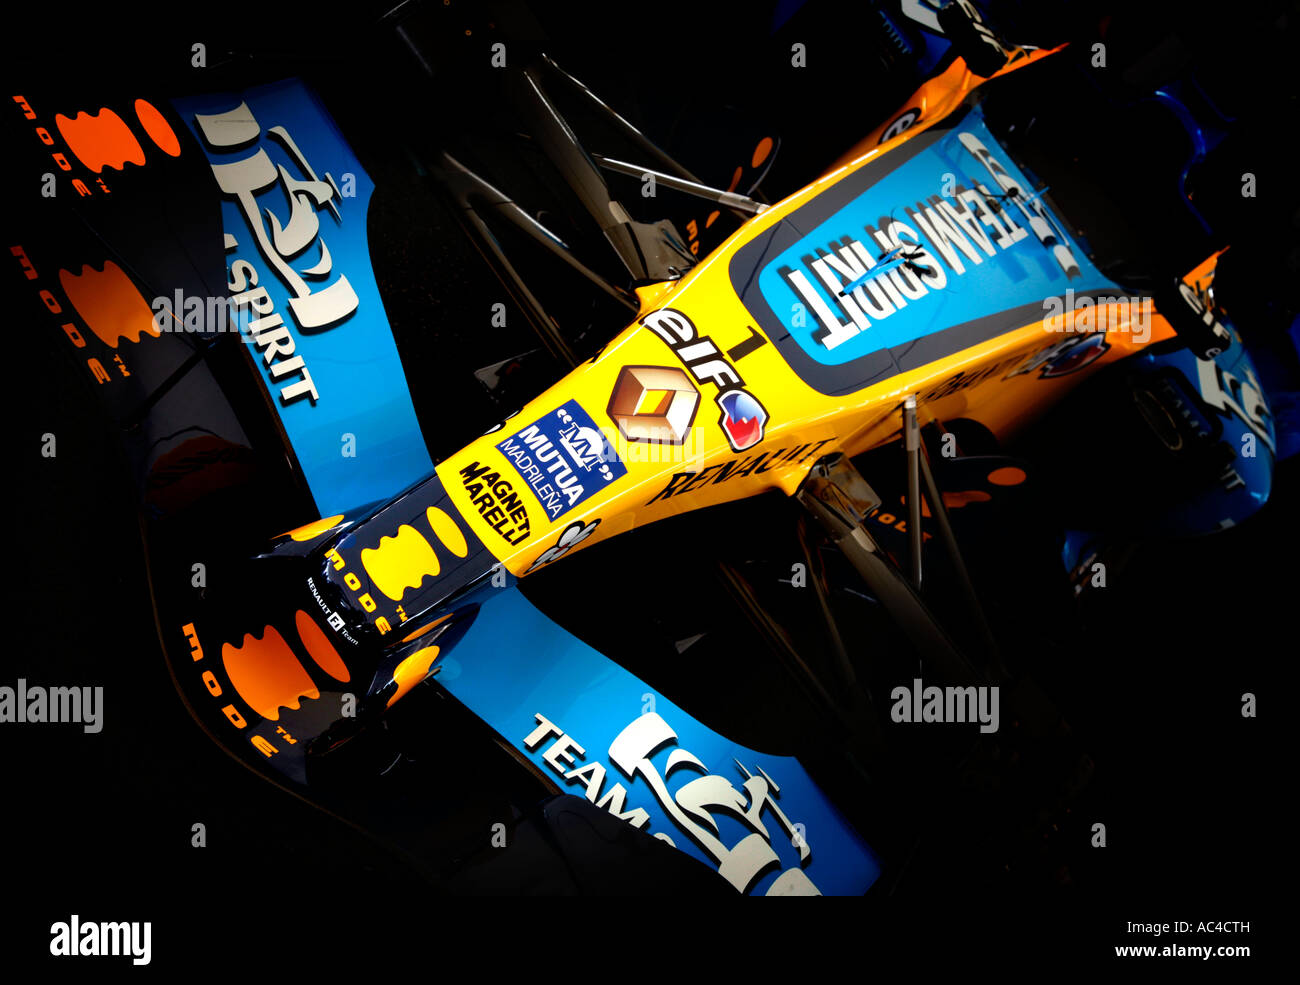 2006 Renault R26 F1 racer of Fernando Alonso, Goodwood Festival of Speed, Sussex, UK. Stock Photo